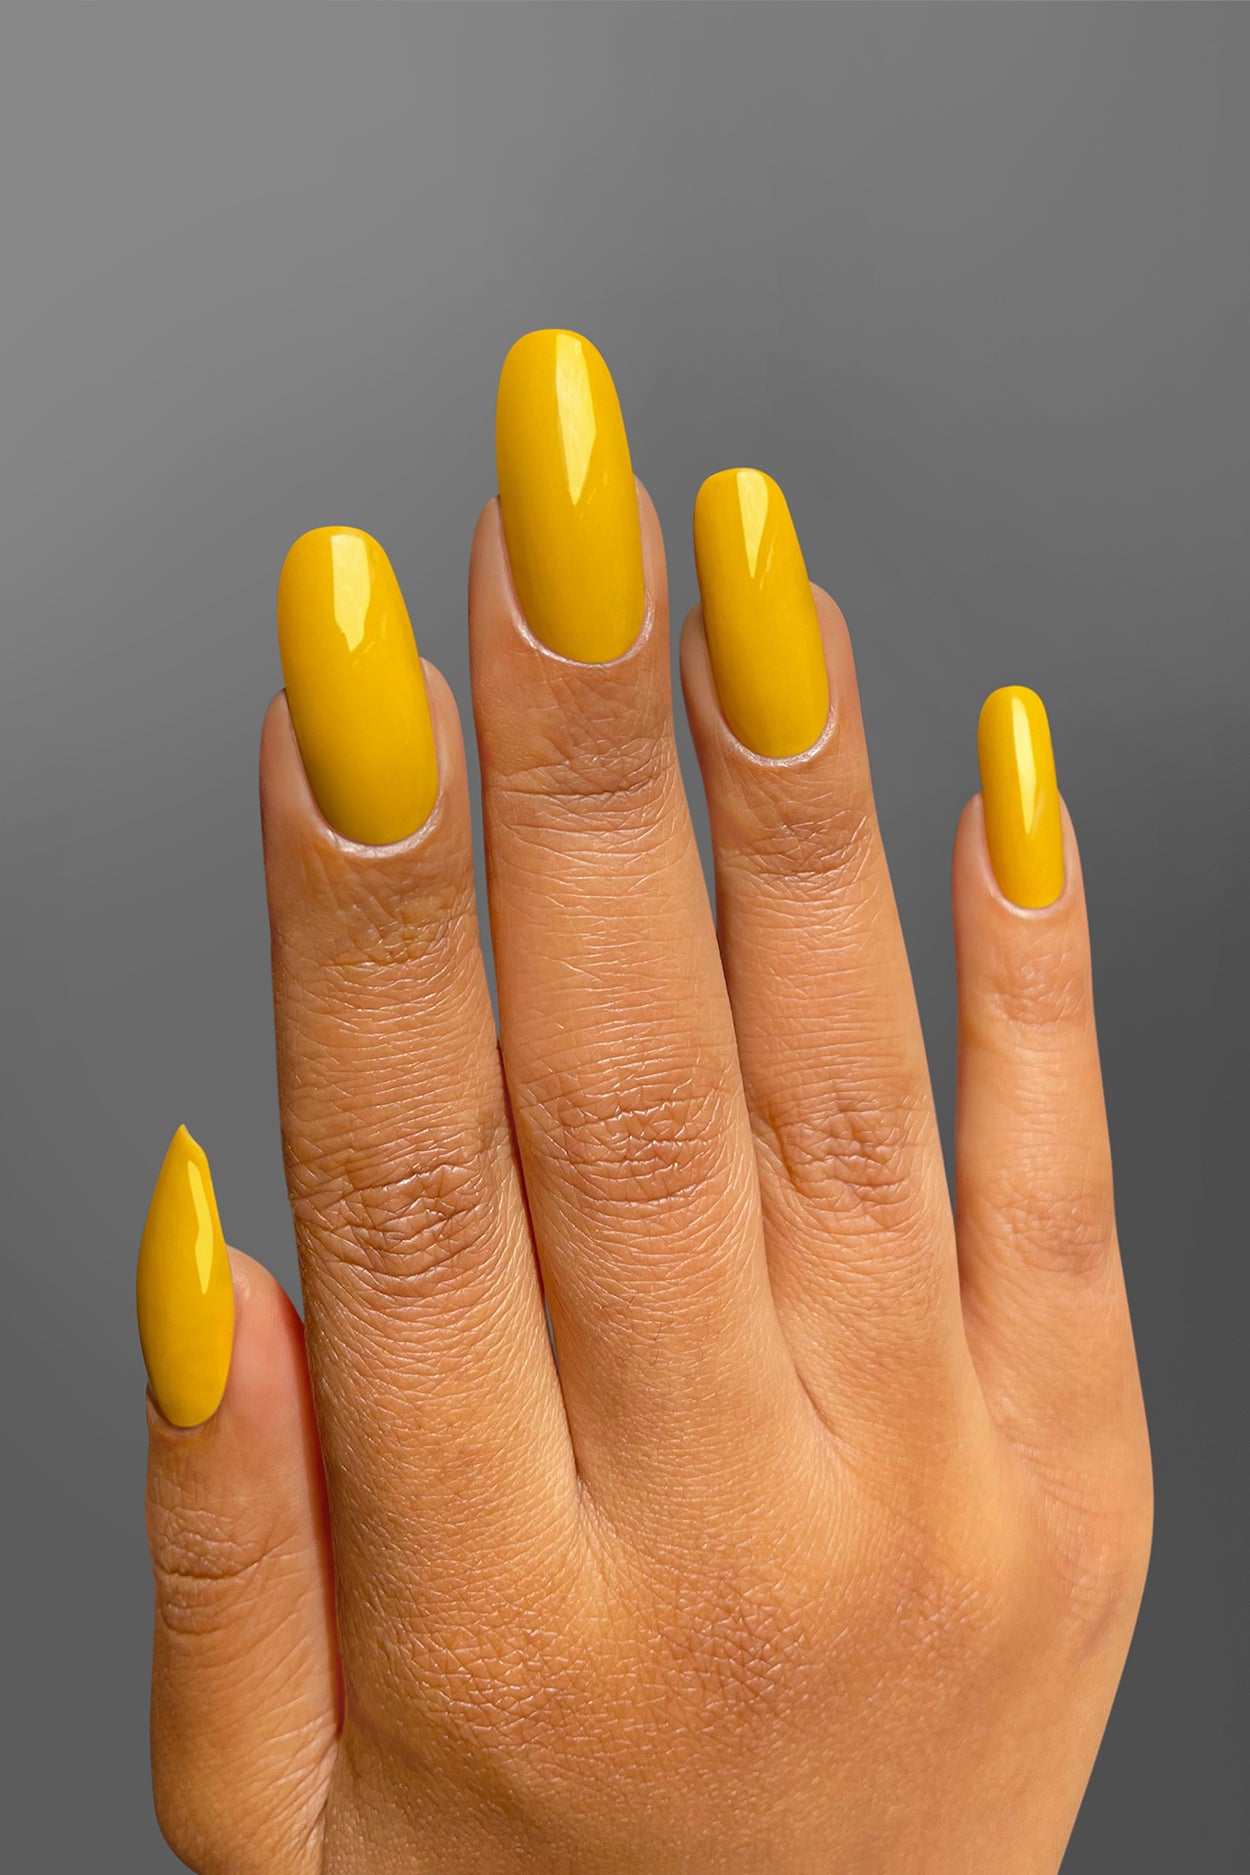 15 Top Spring Nail Colors for 2021 - An Unblurred Lady | Yellow nails,  Spring nail colors, Yellow nails design